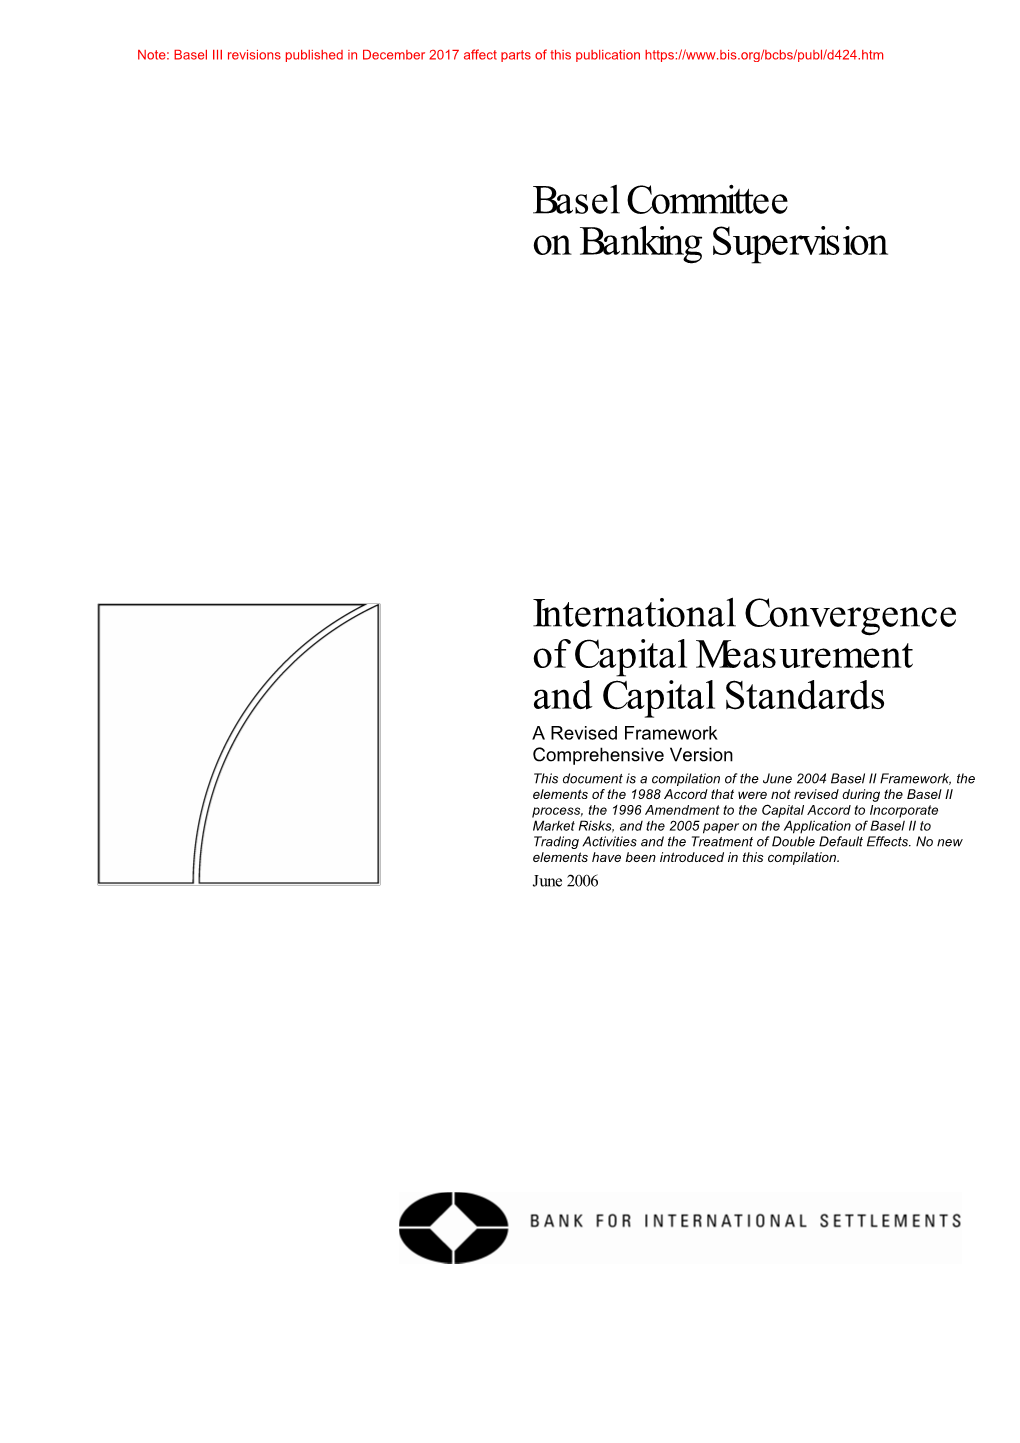 International Convergence of Capital Measurement And